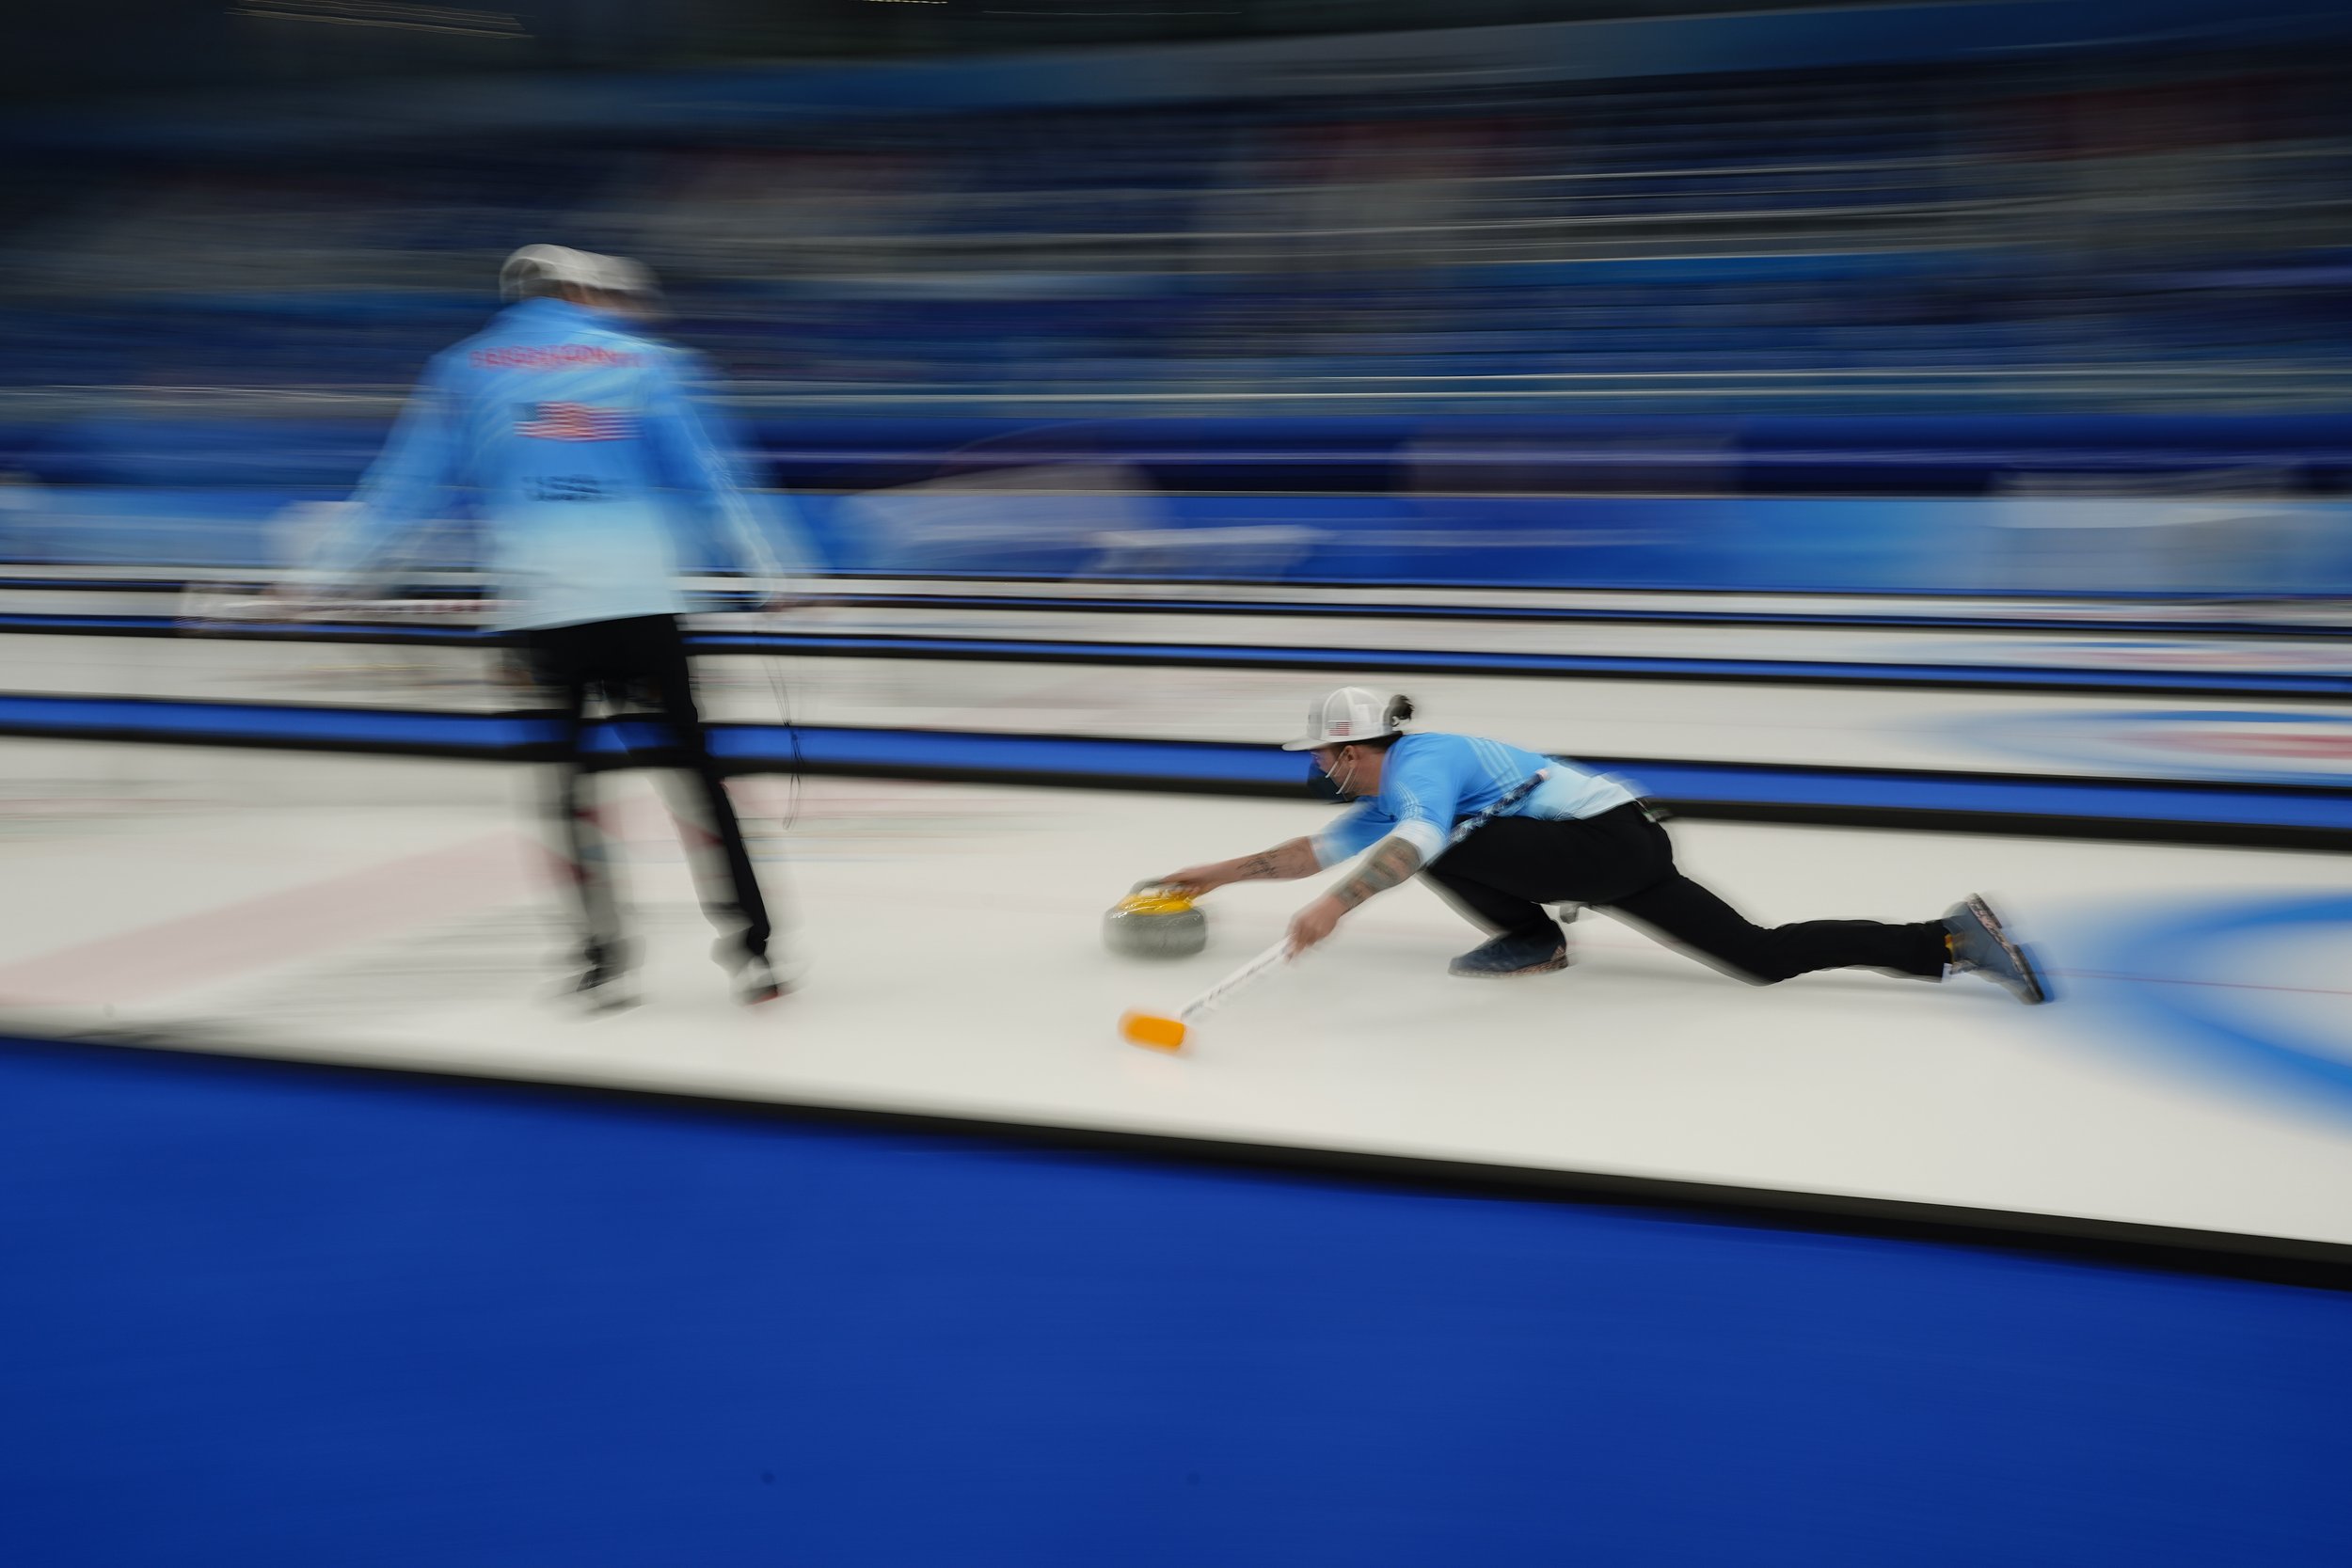  Christopher Plys, of the United States, throws a rock during practice before the mixed doubles curling match against China at the Beijing Winter Olympics Saturday, Feb. 5, 2022, in Beijing. (AP Photo/Brynn Anderson) 